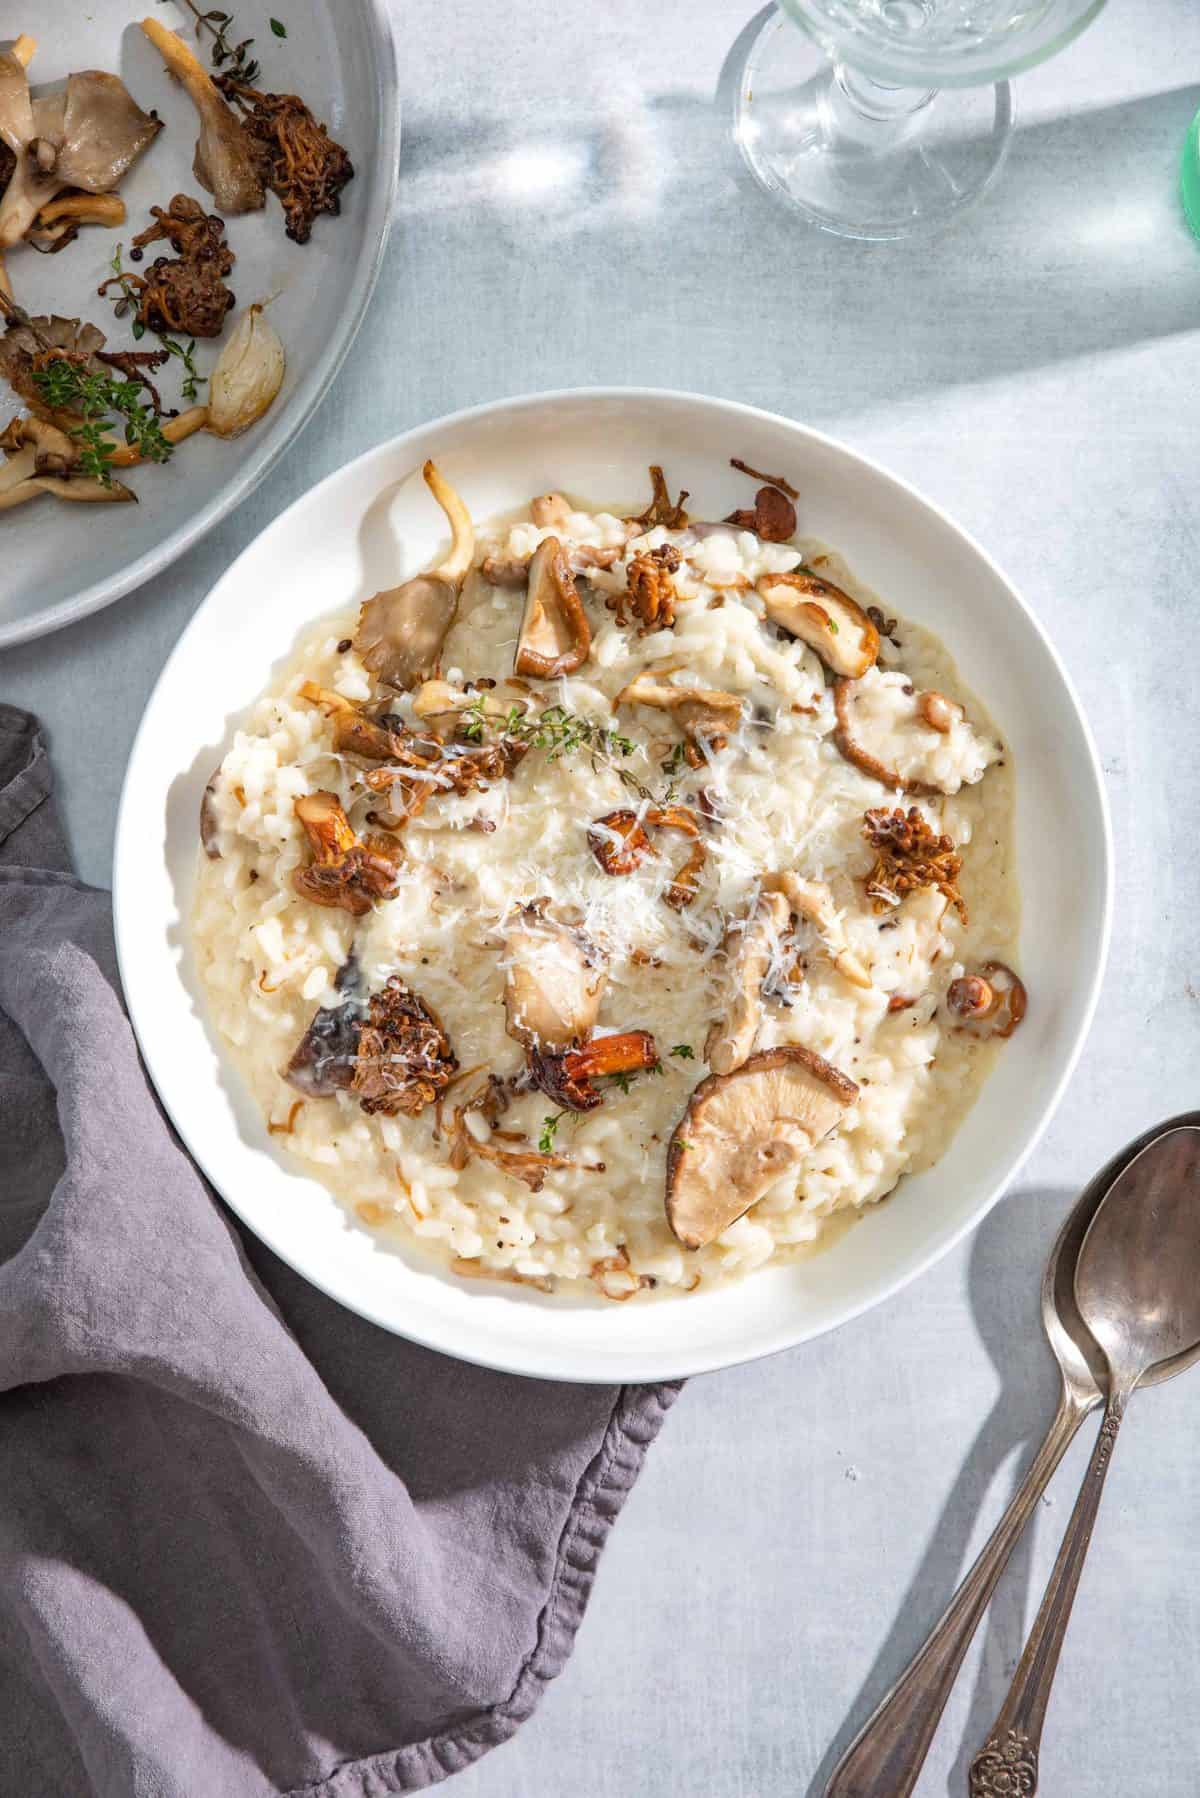 Creamy Roasted Mushroom Risotto with Truffle Oil